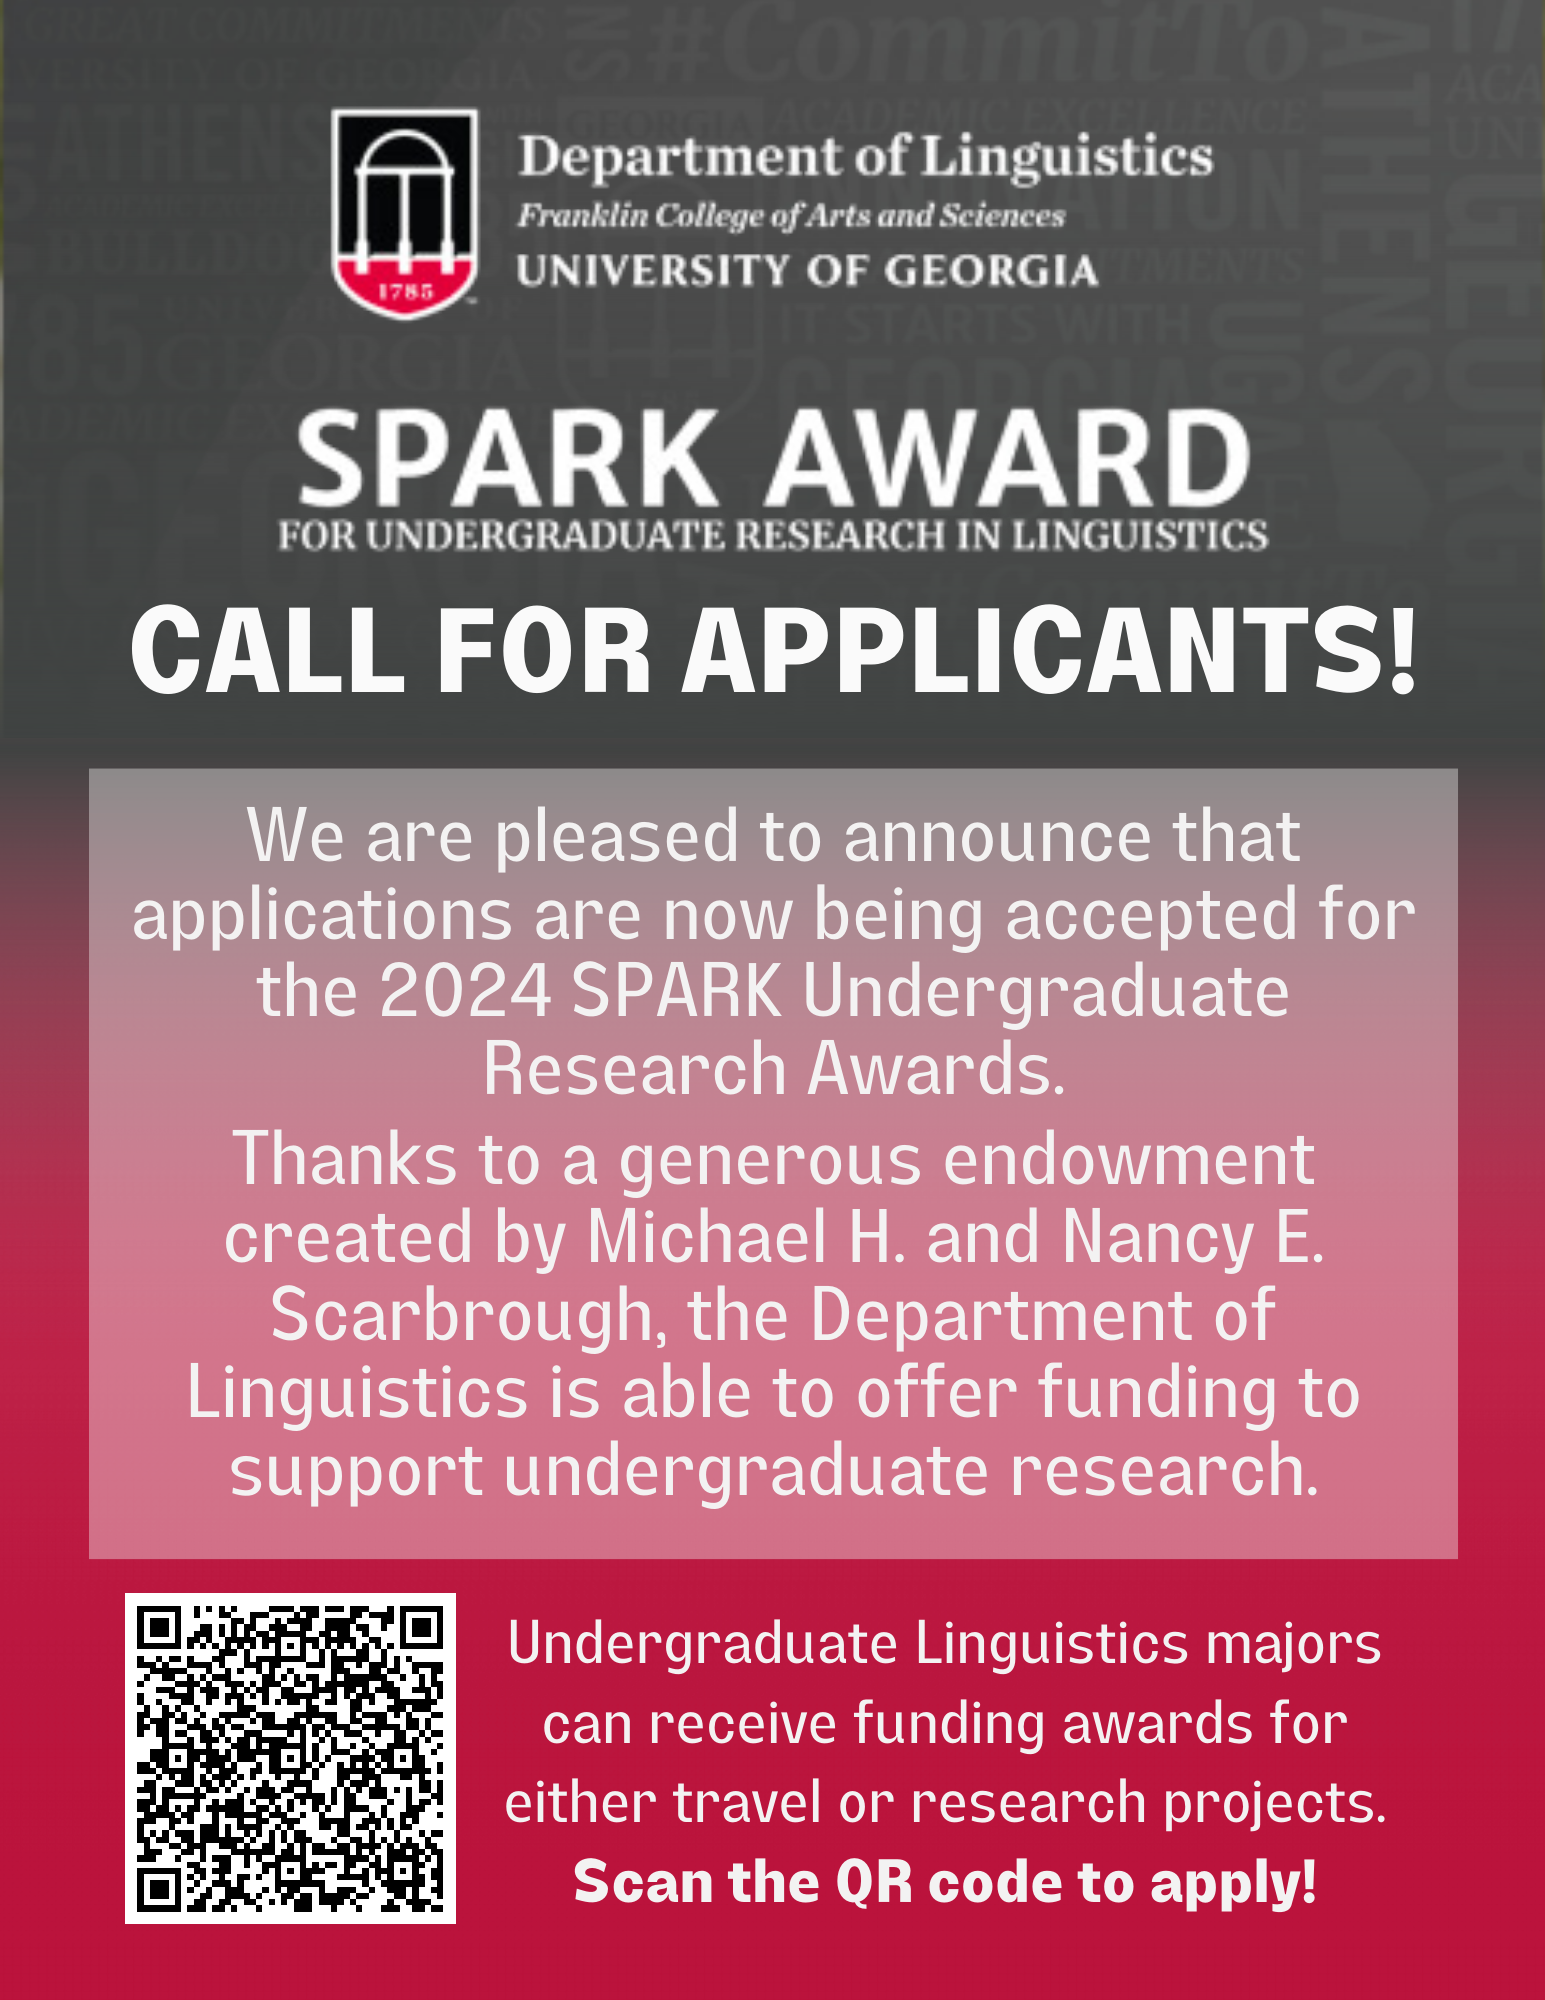 Linguistics at University of Georgia - Spark Award for Undergraduate Research in Linguistics - Call for applicants! We are pleased to announce that applications are now being accepted for the 2024 SPARK Undergraduate Research awards. Thanks to a generous endowment created by Michael H. and Nancy E. Scarbrough, the Department of Linguistics is able to offer funding to support undergraduate research. Undergraduate Linguistics majors can receive funding awards for either travel or research projects. Scan the QR code to apply! 